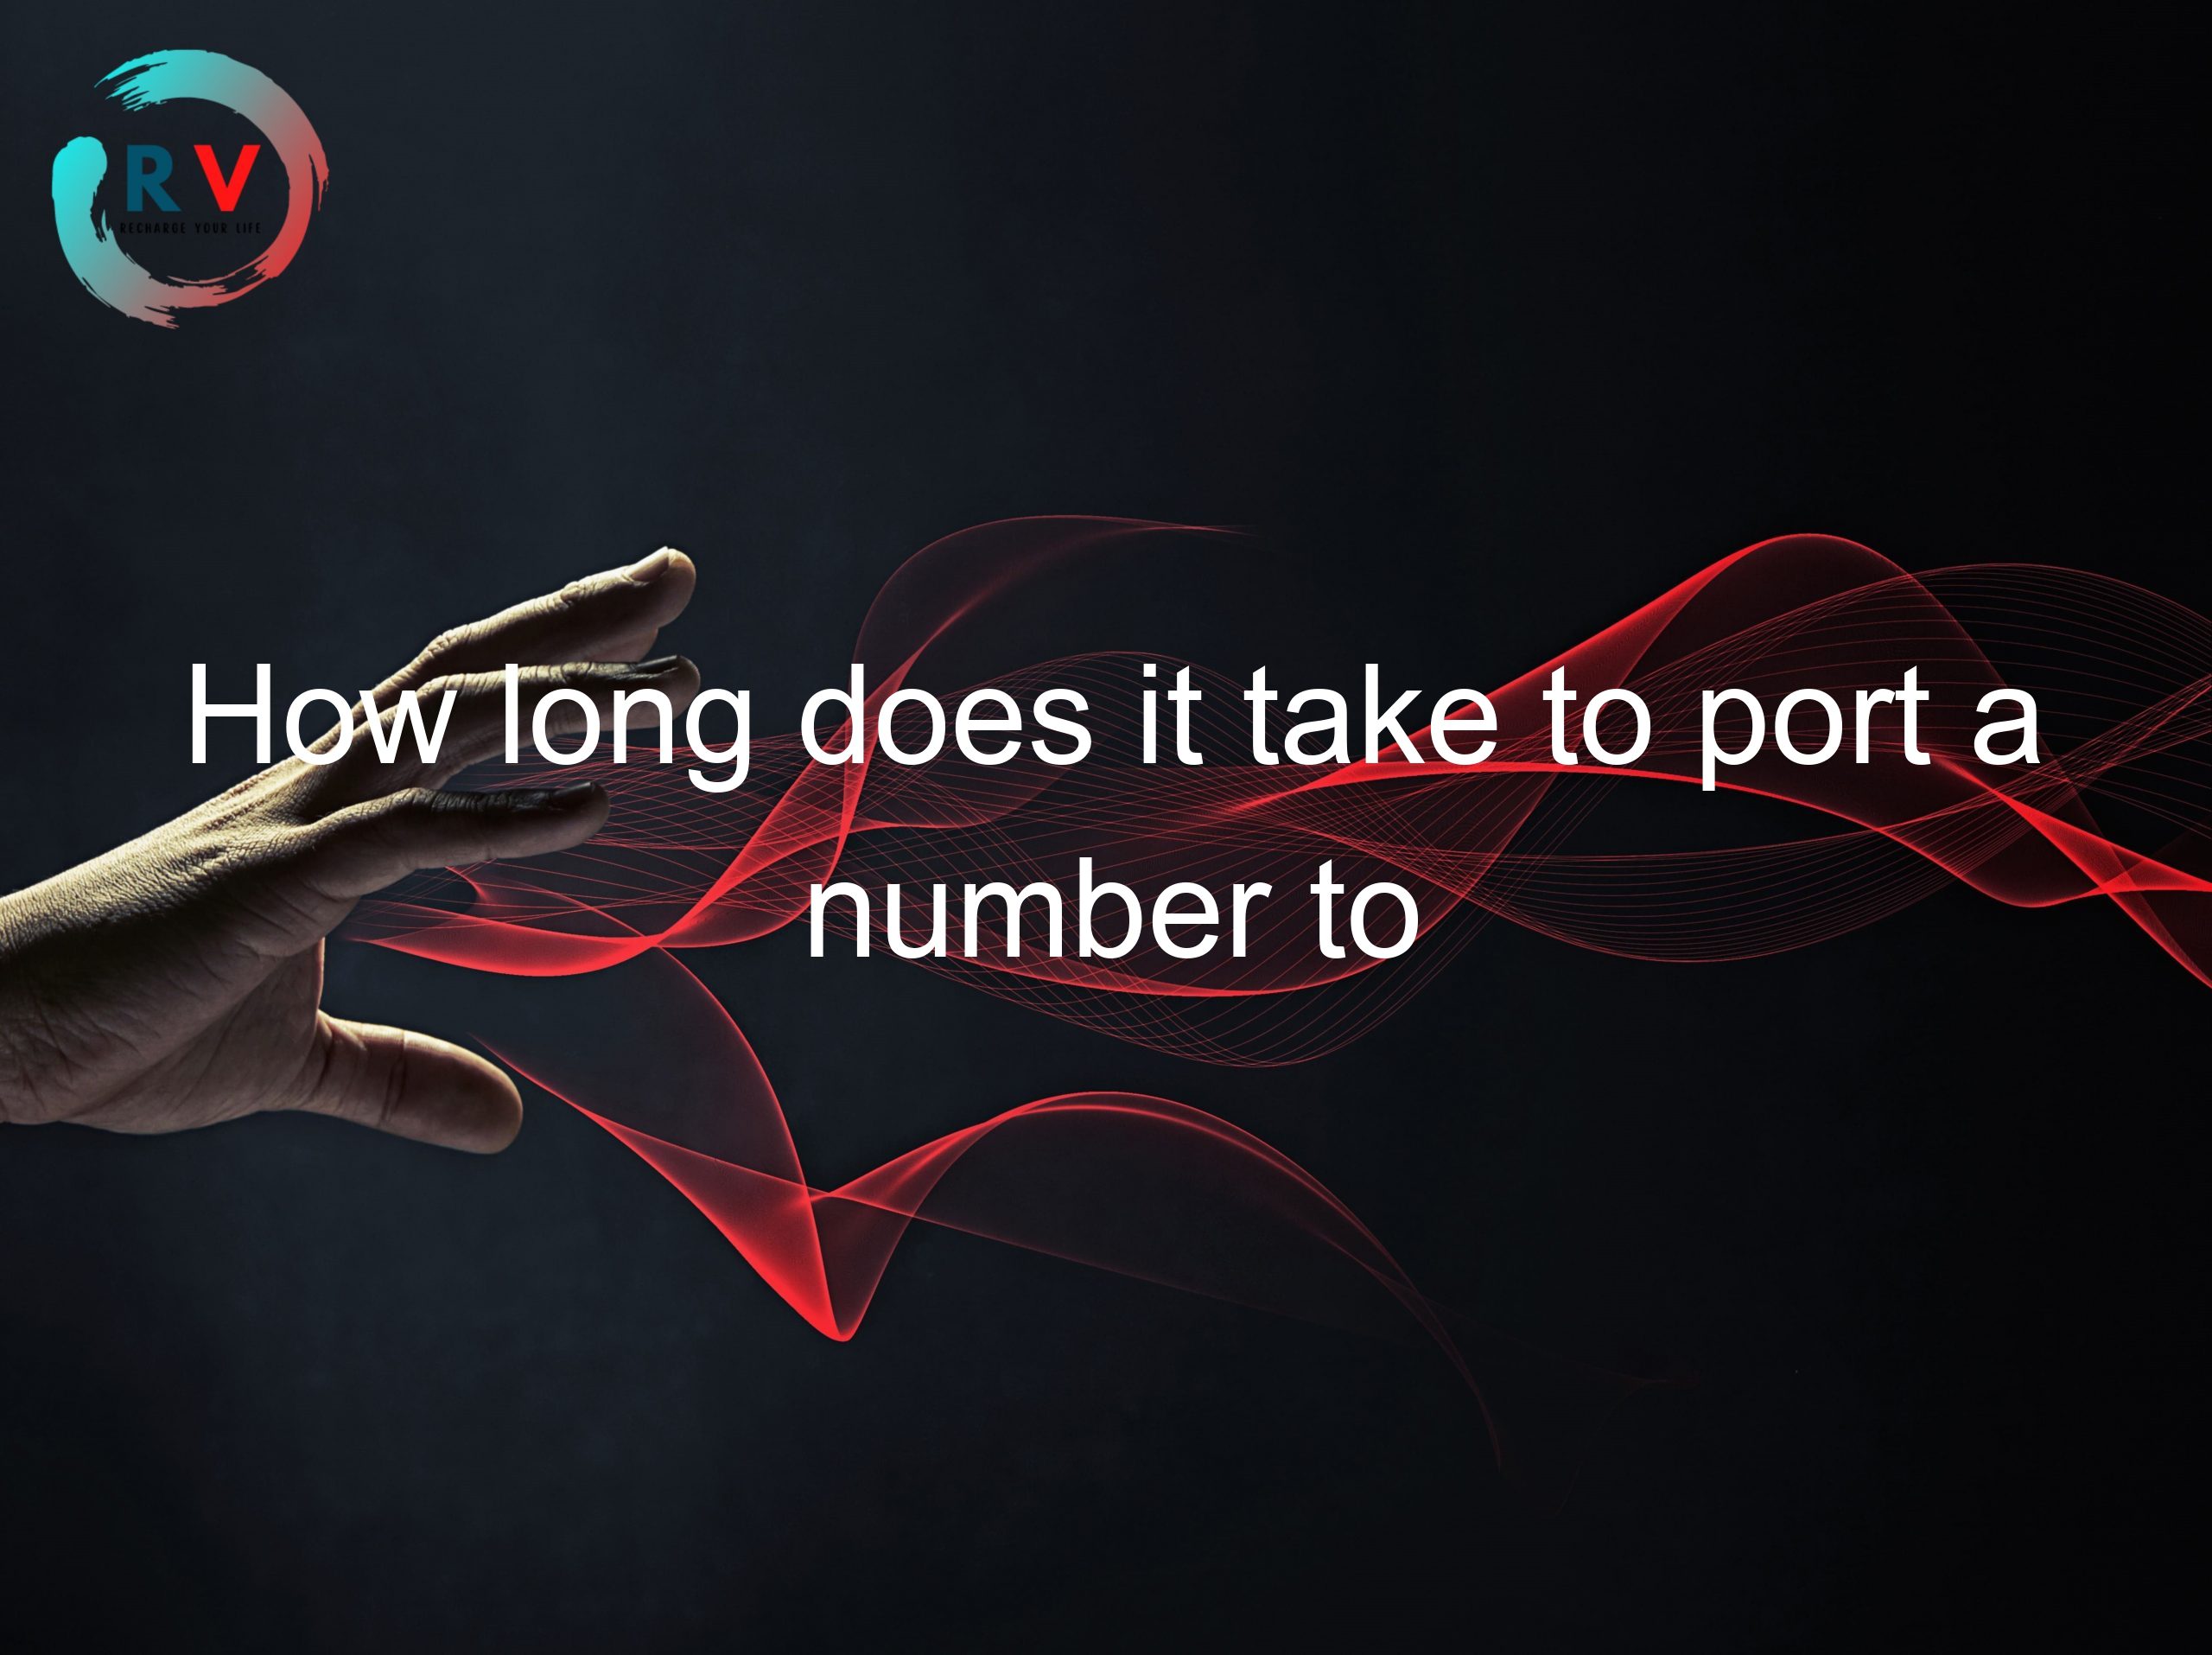 How long does it take to port a number to Vodafone?